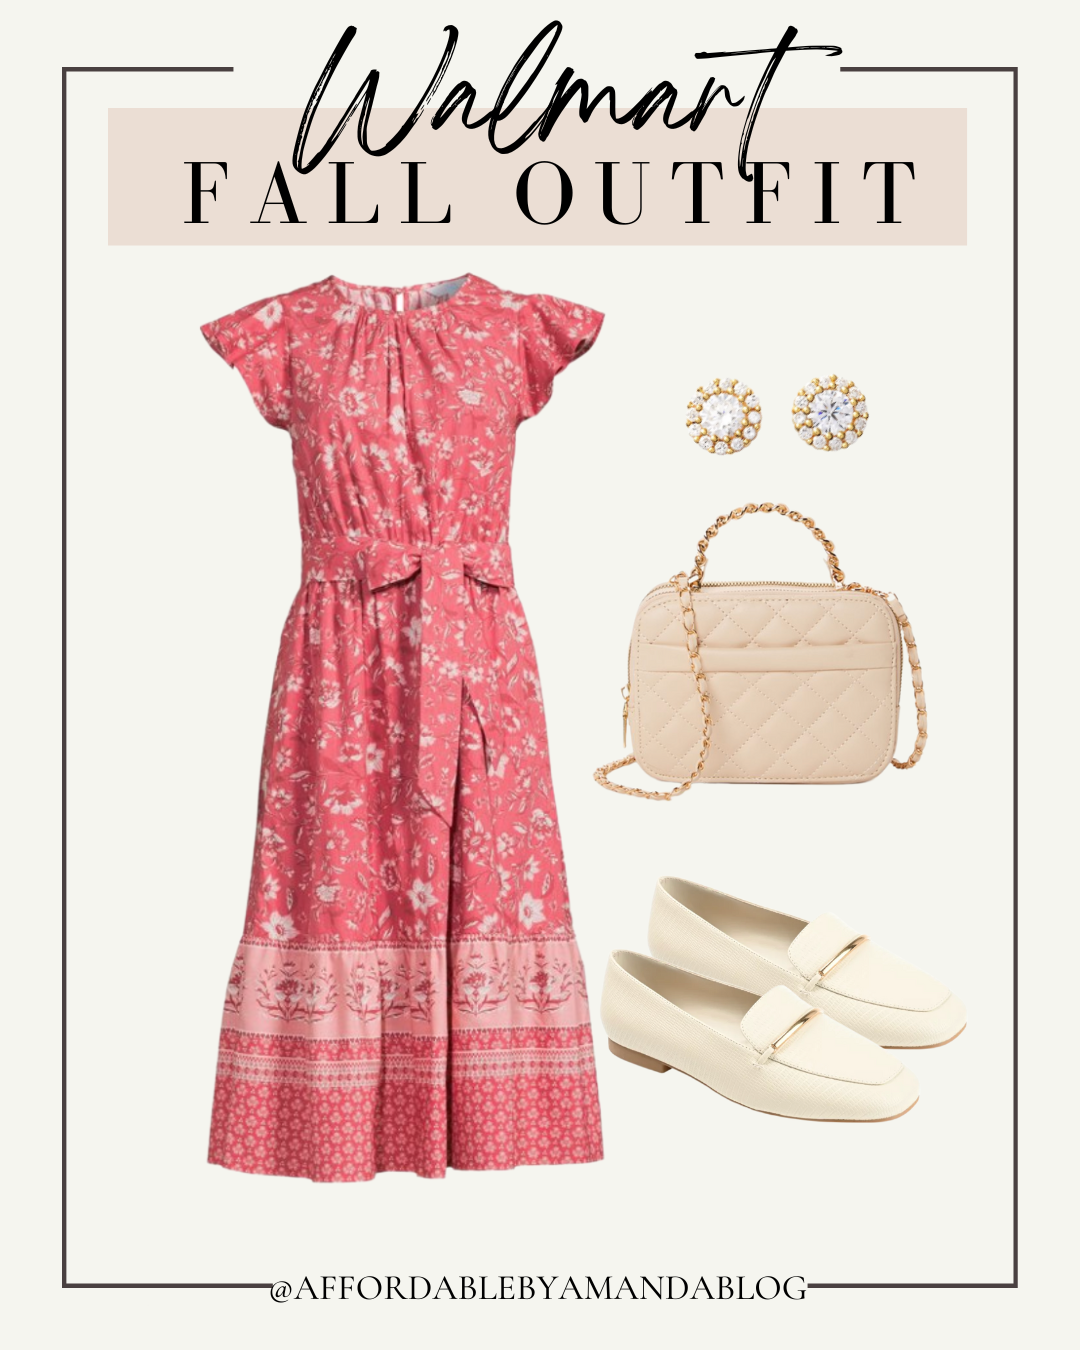 Cute Fall New Arrivals at Walmart - Walmart Fall Fashion Finds 2022 - Fall Outfit Ideas from Walmart on a Budget.